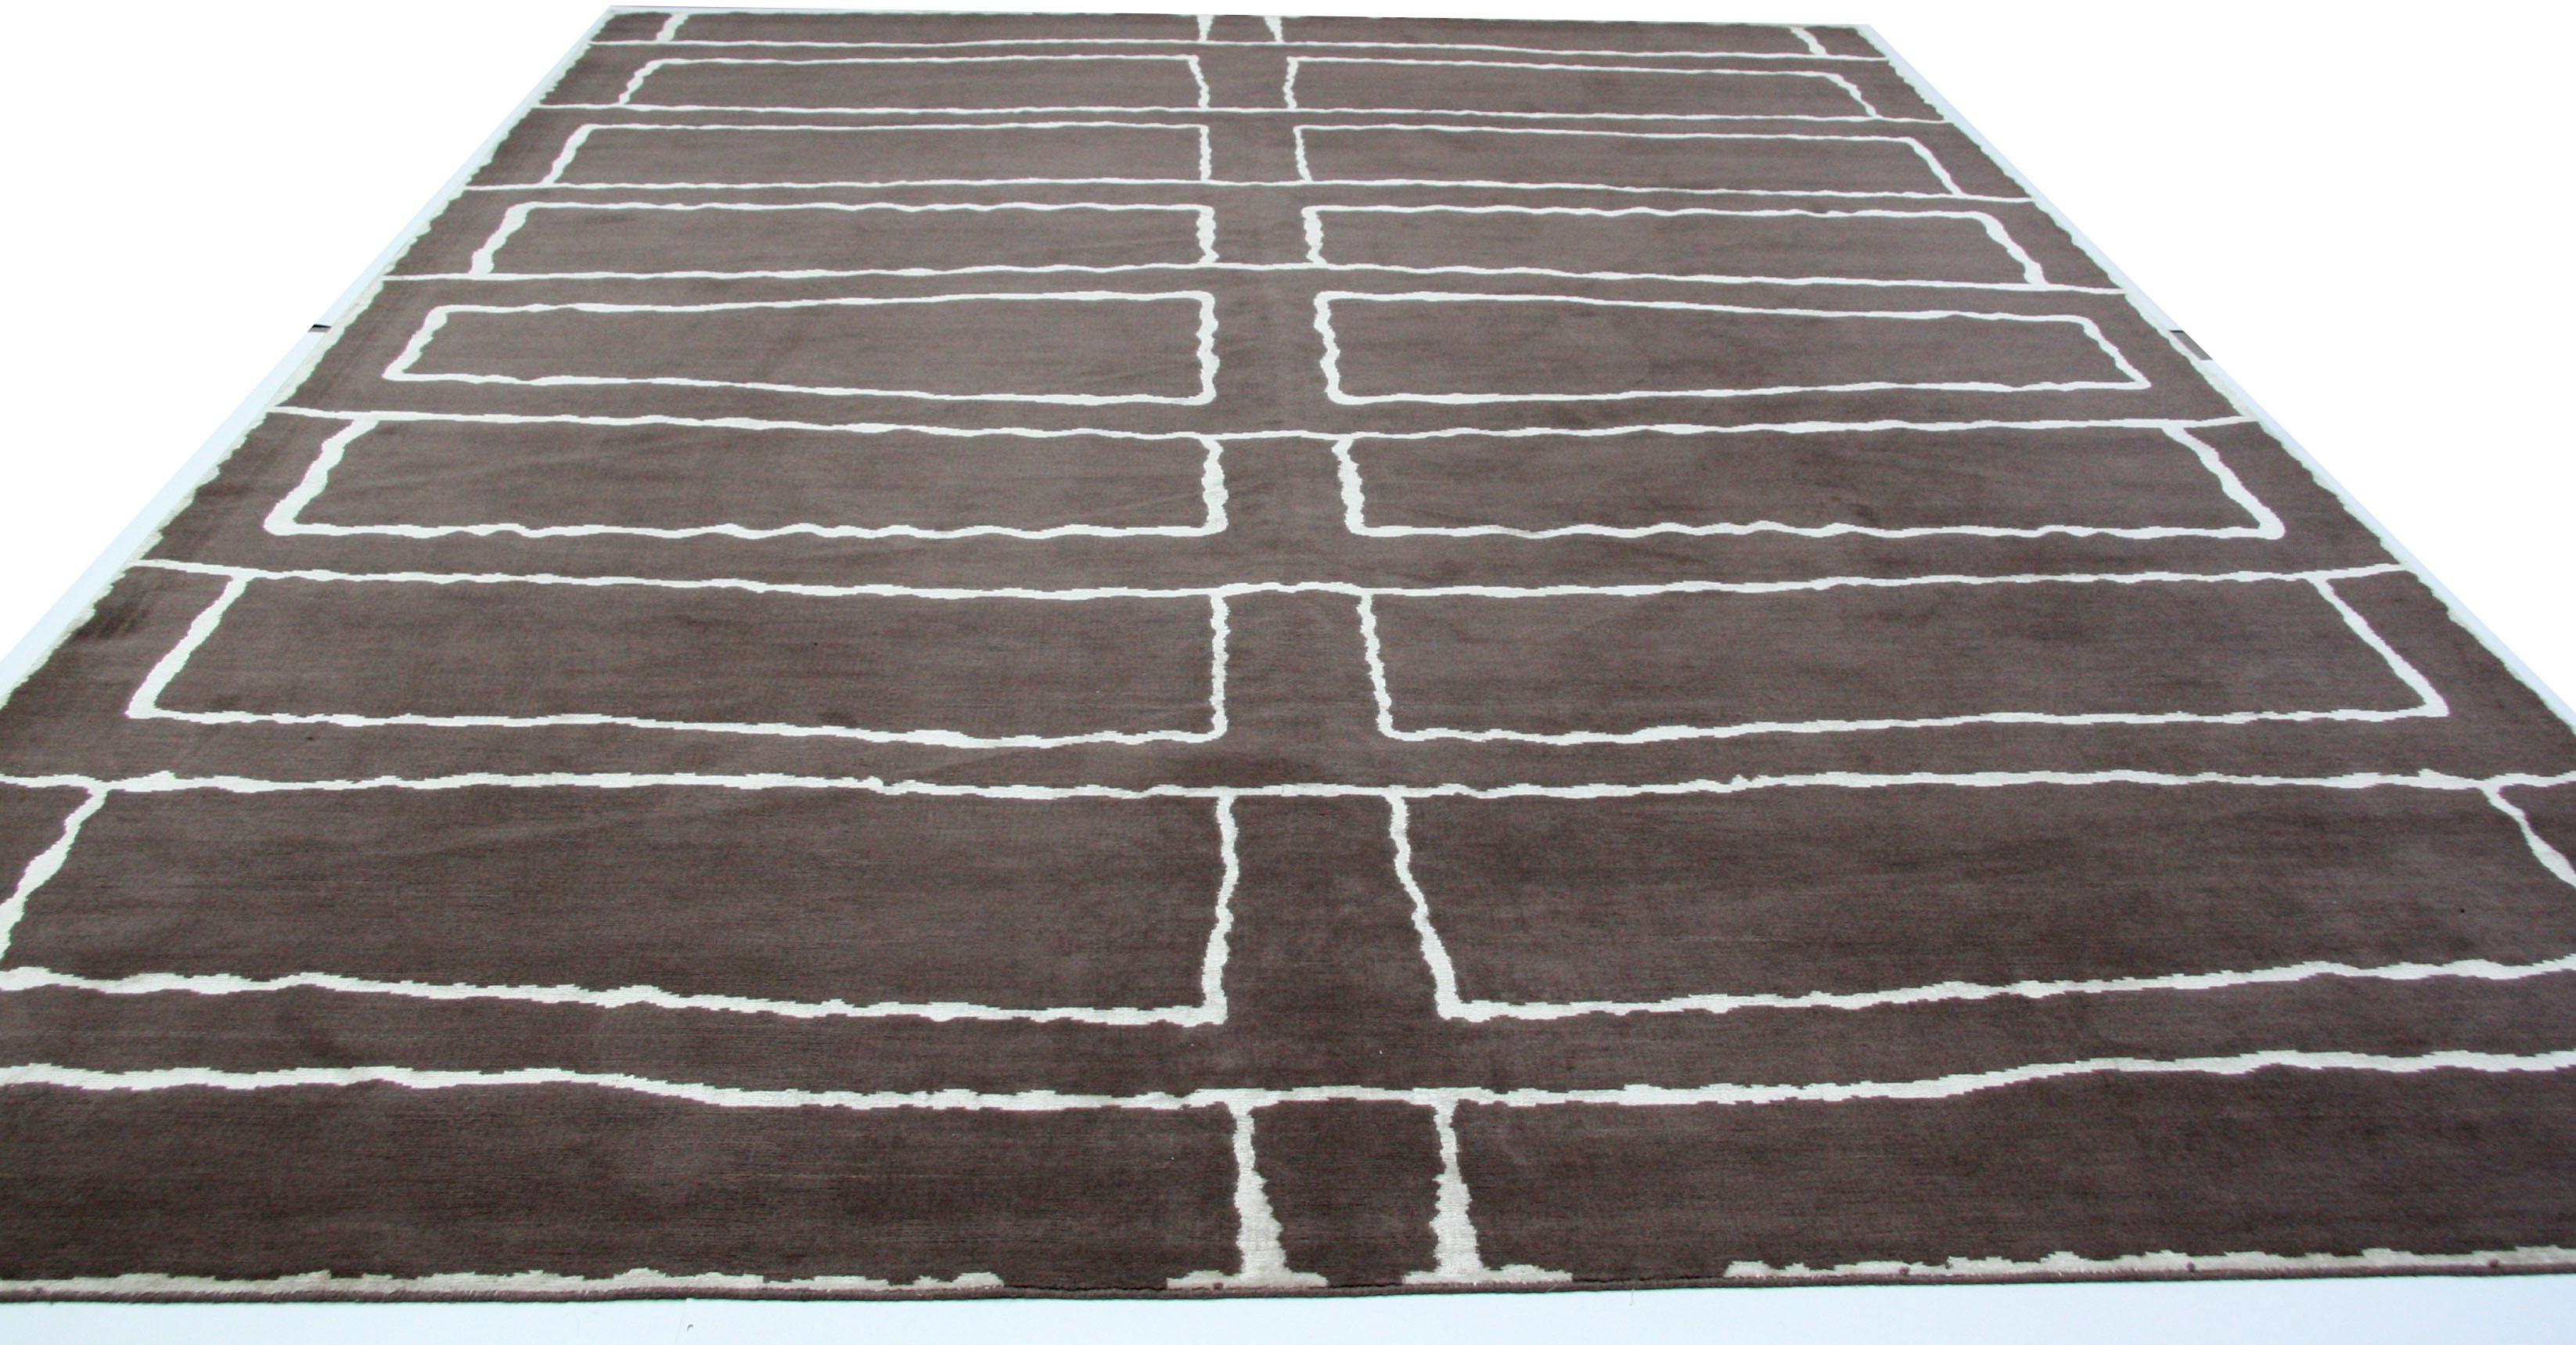 A contemporary line drawing is the inspiration for this dark brown and cream area rug. An excellent companion piece to the modern art-filled home or office space. 

Wool/Silk. Made in India using natural vegetal dyes. 

Also available in